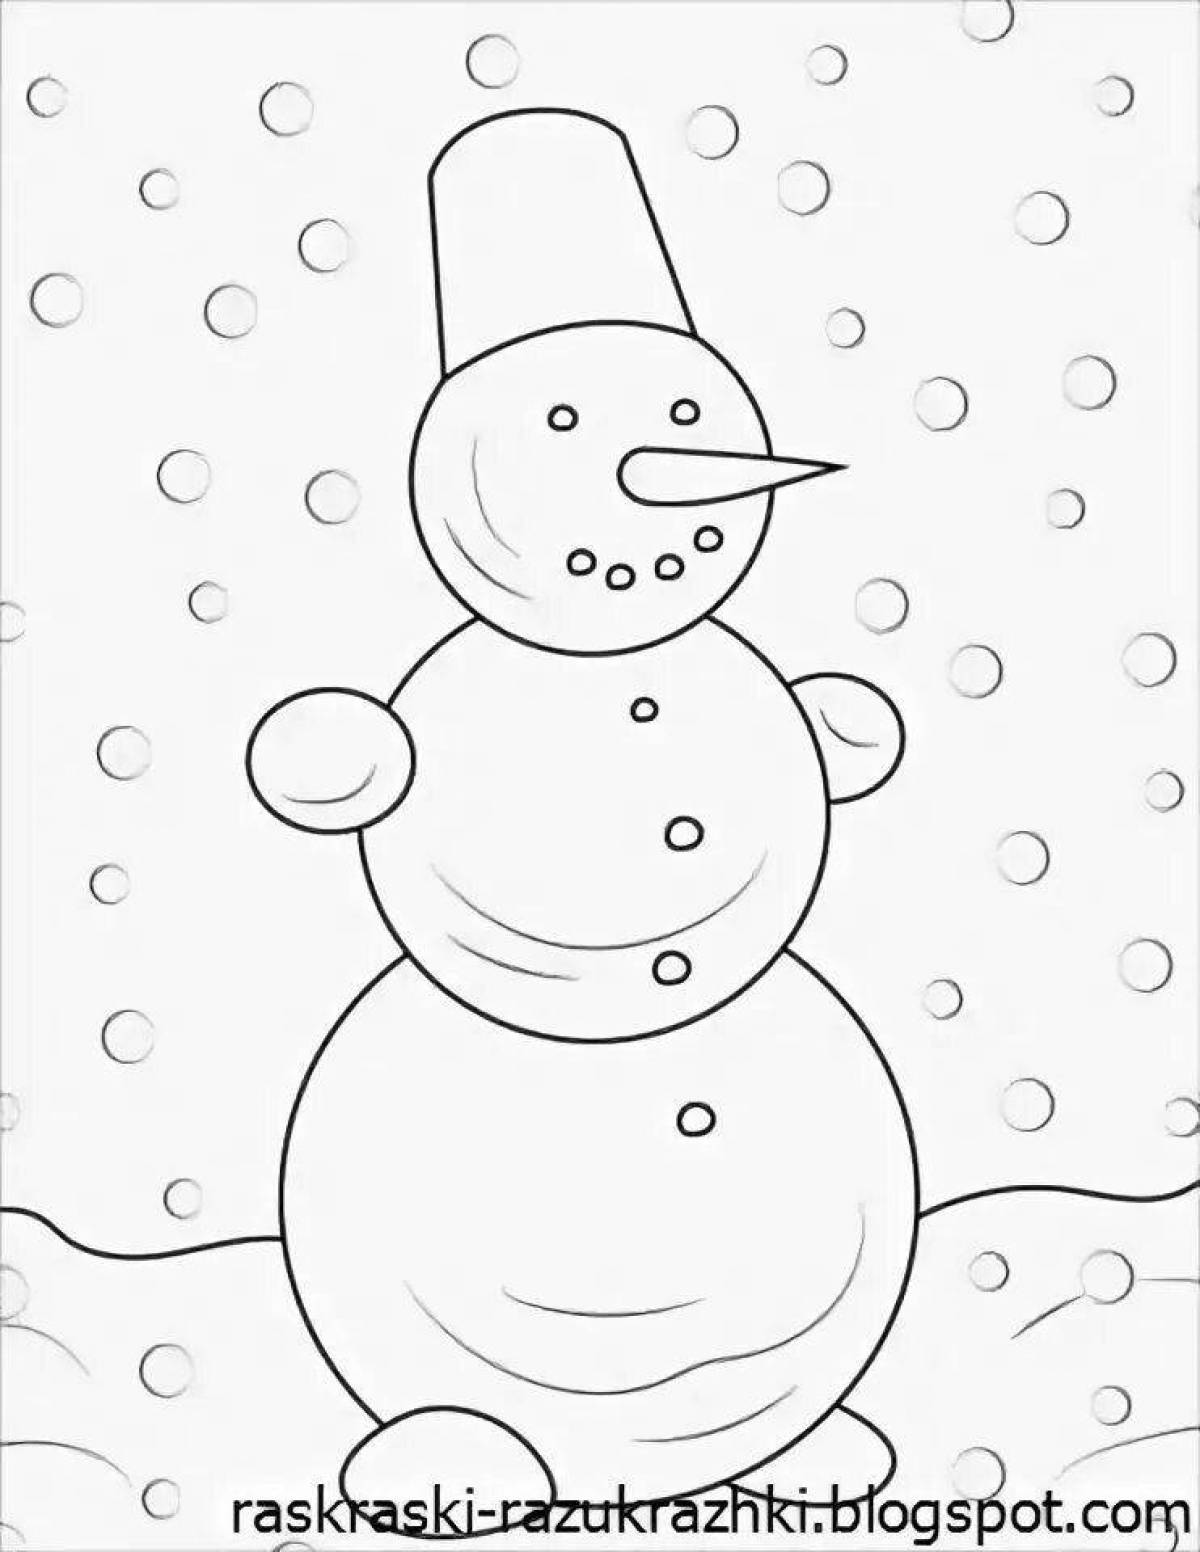 Cute snowman coloring book for kids 2-3 years old